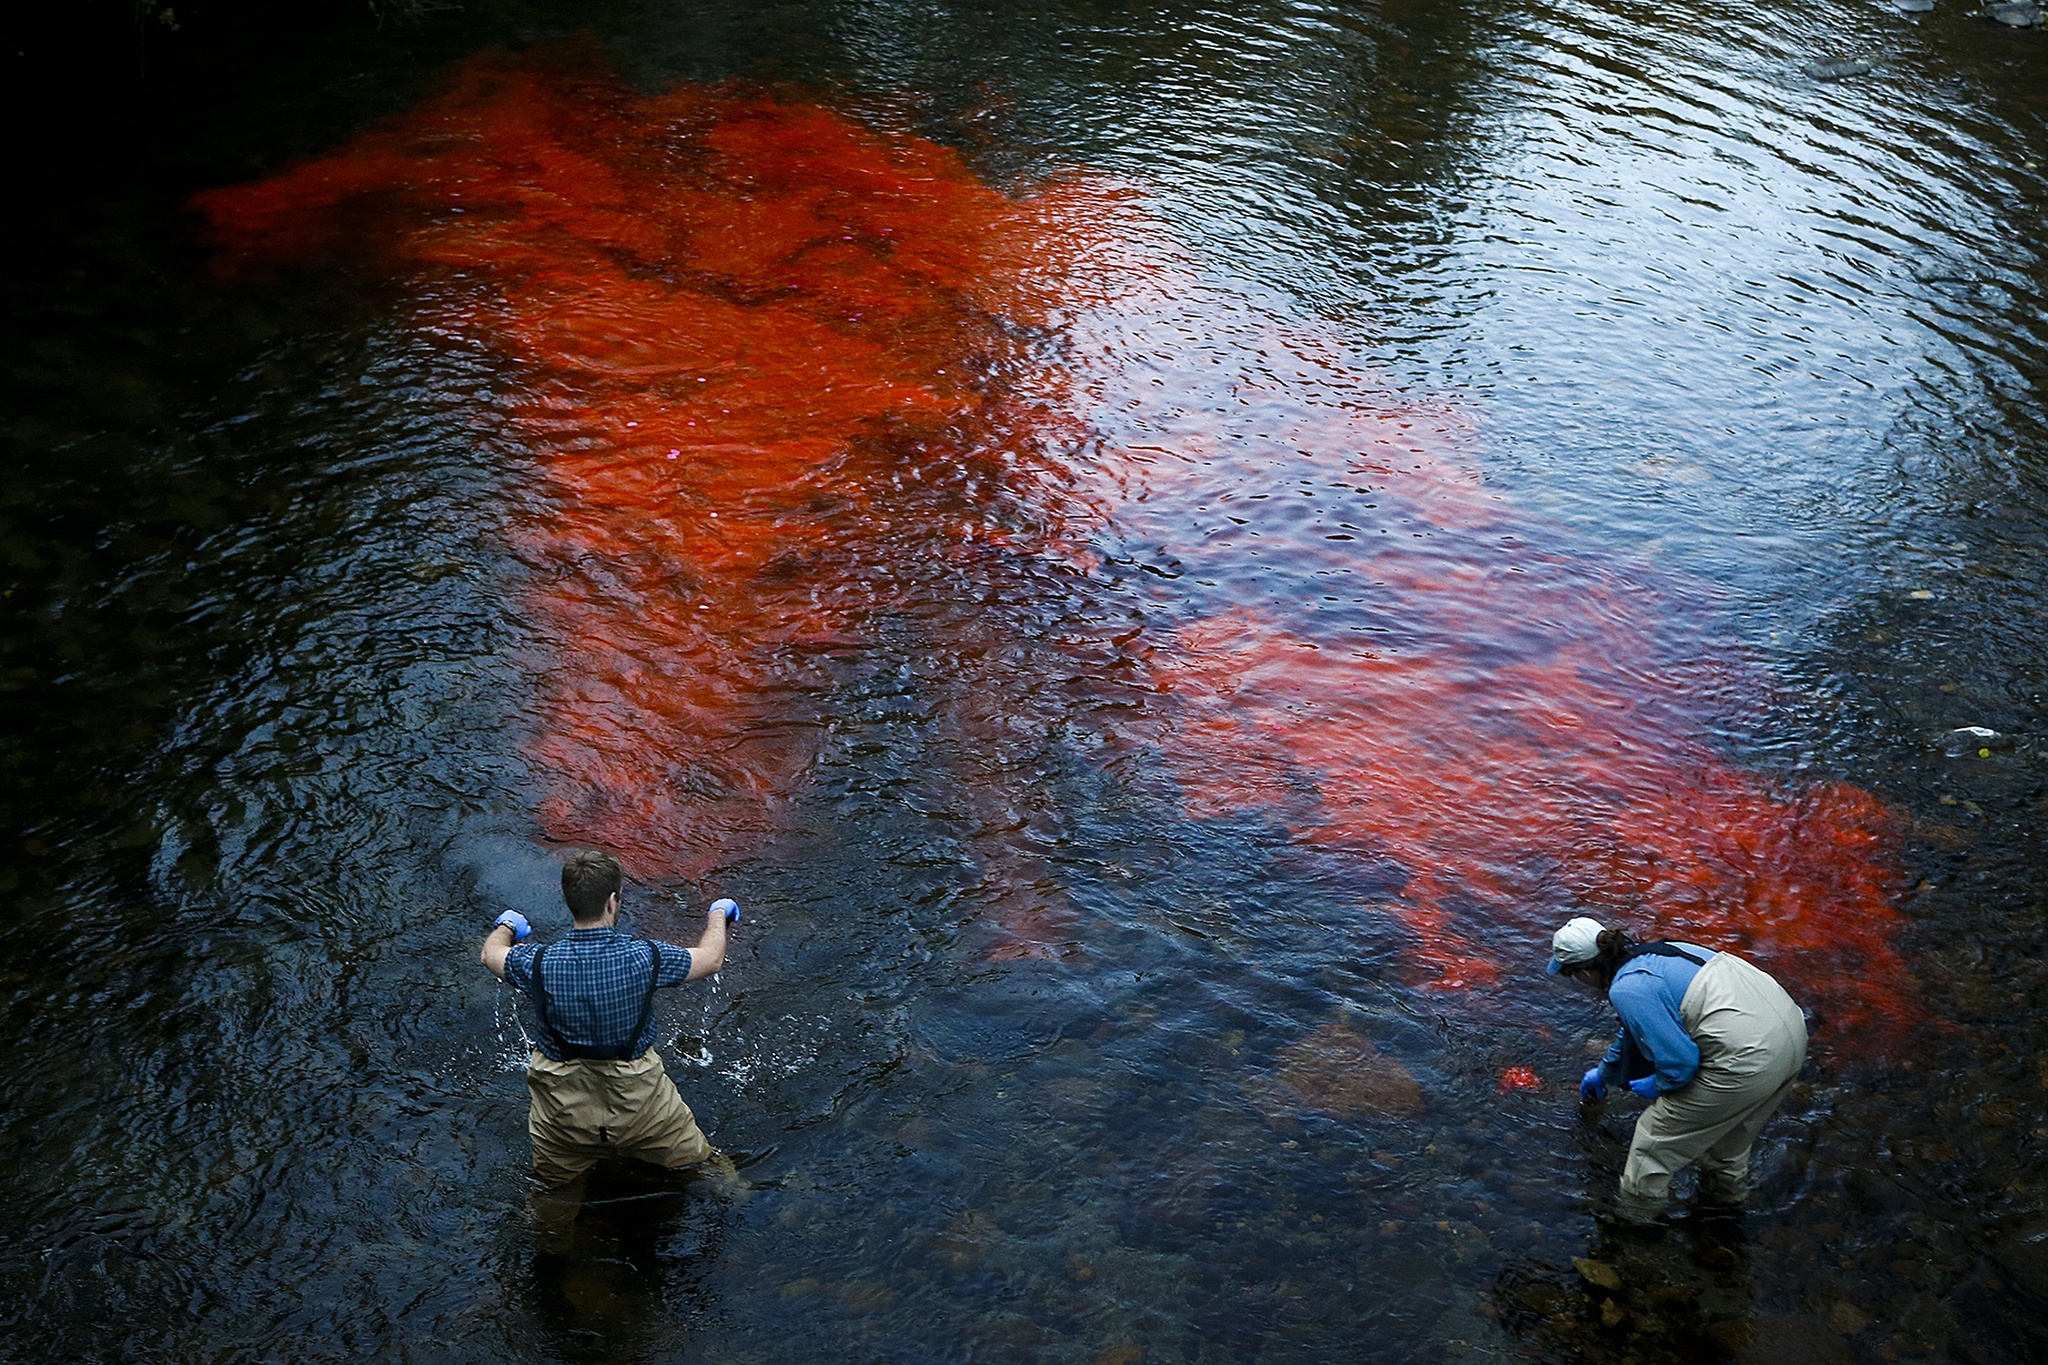 Nuri Mathieu (left), a water quality scientist with the Department of Ecology, and technician Paula Cracknell release a fluorescent pink dye called Rhodamine into the Pilchuck River near Menzel Lake Road south of Granite Falls on Tuesday evening. Teams of scientists from the state Department of Ecology will be monitoring the dye and using the data gathered to create computer models of the river for future cleaning and restoration. (Ian Terry / The Herald)